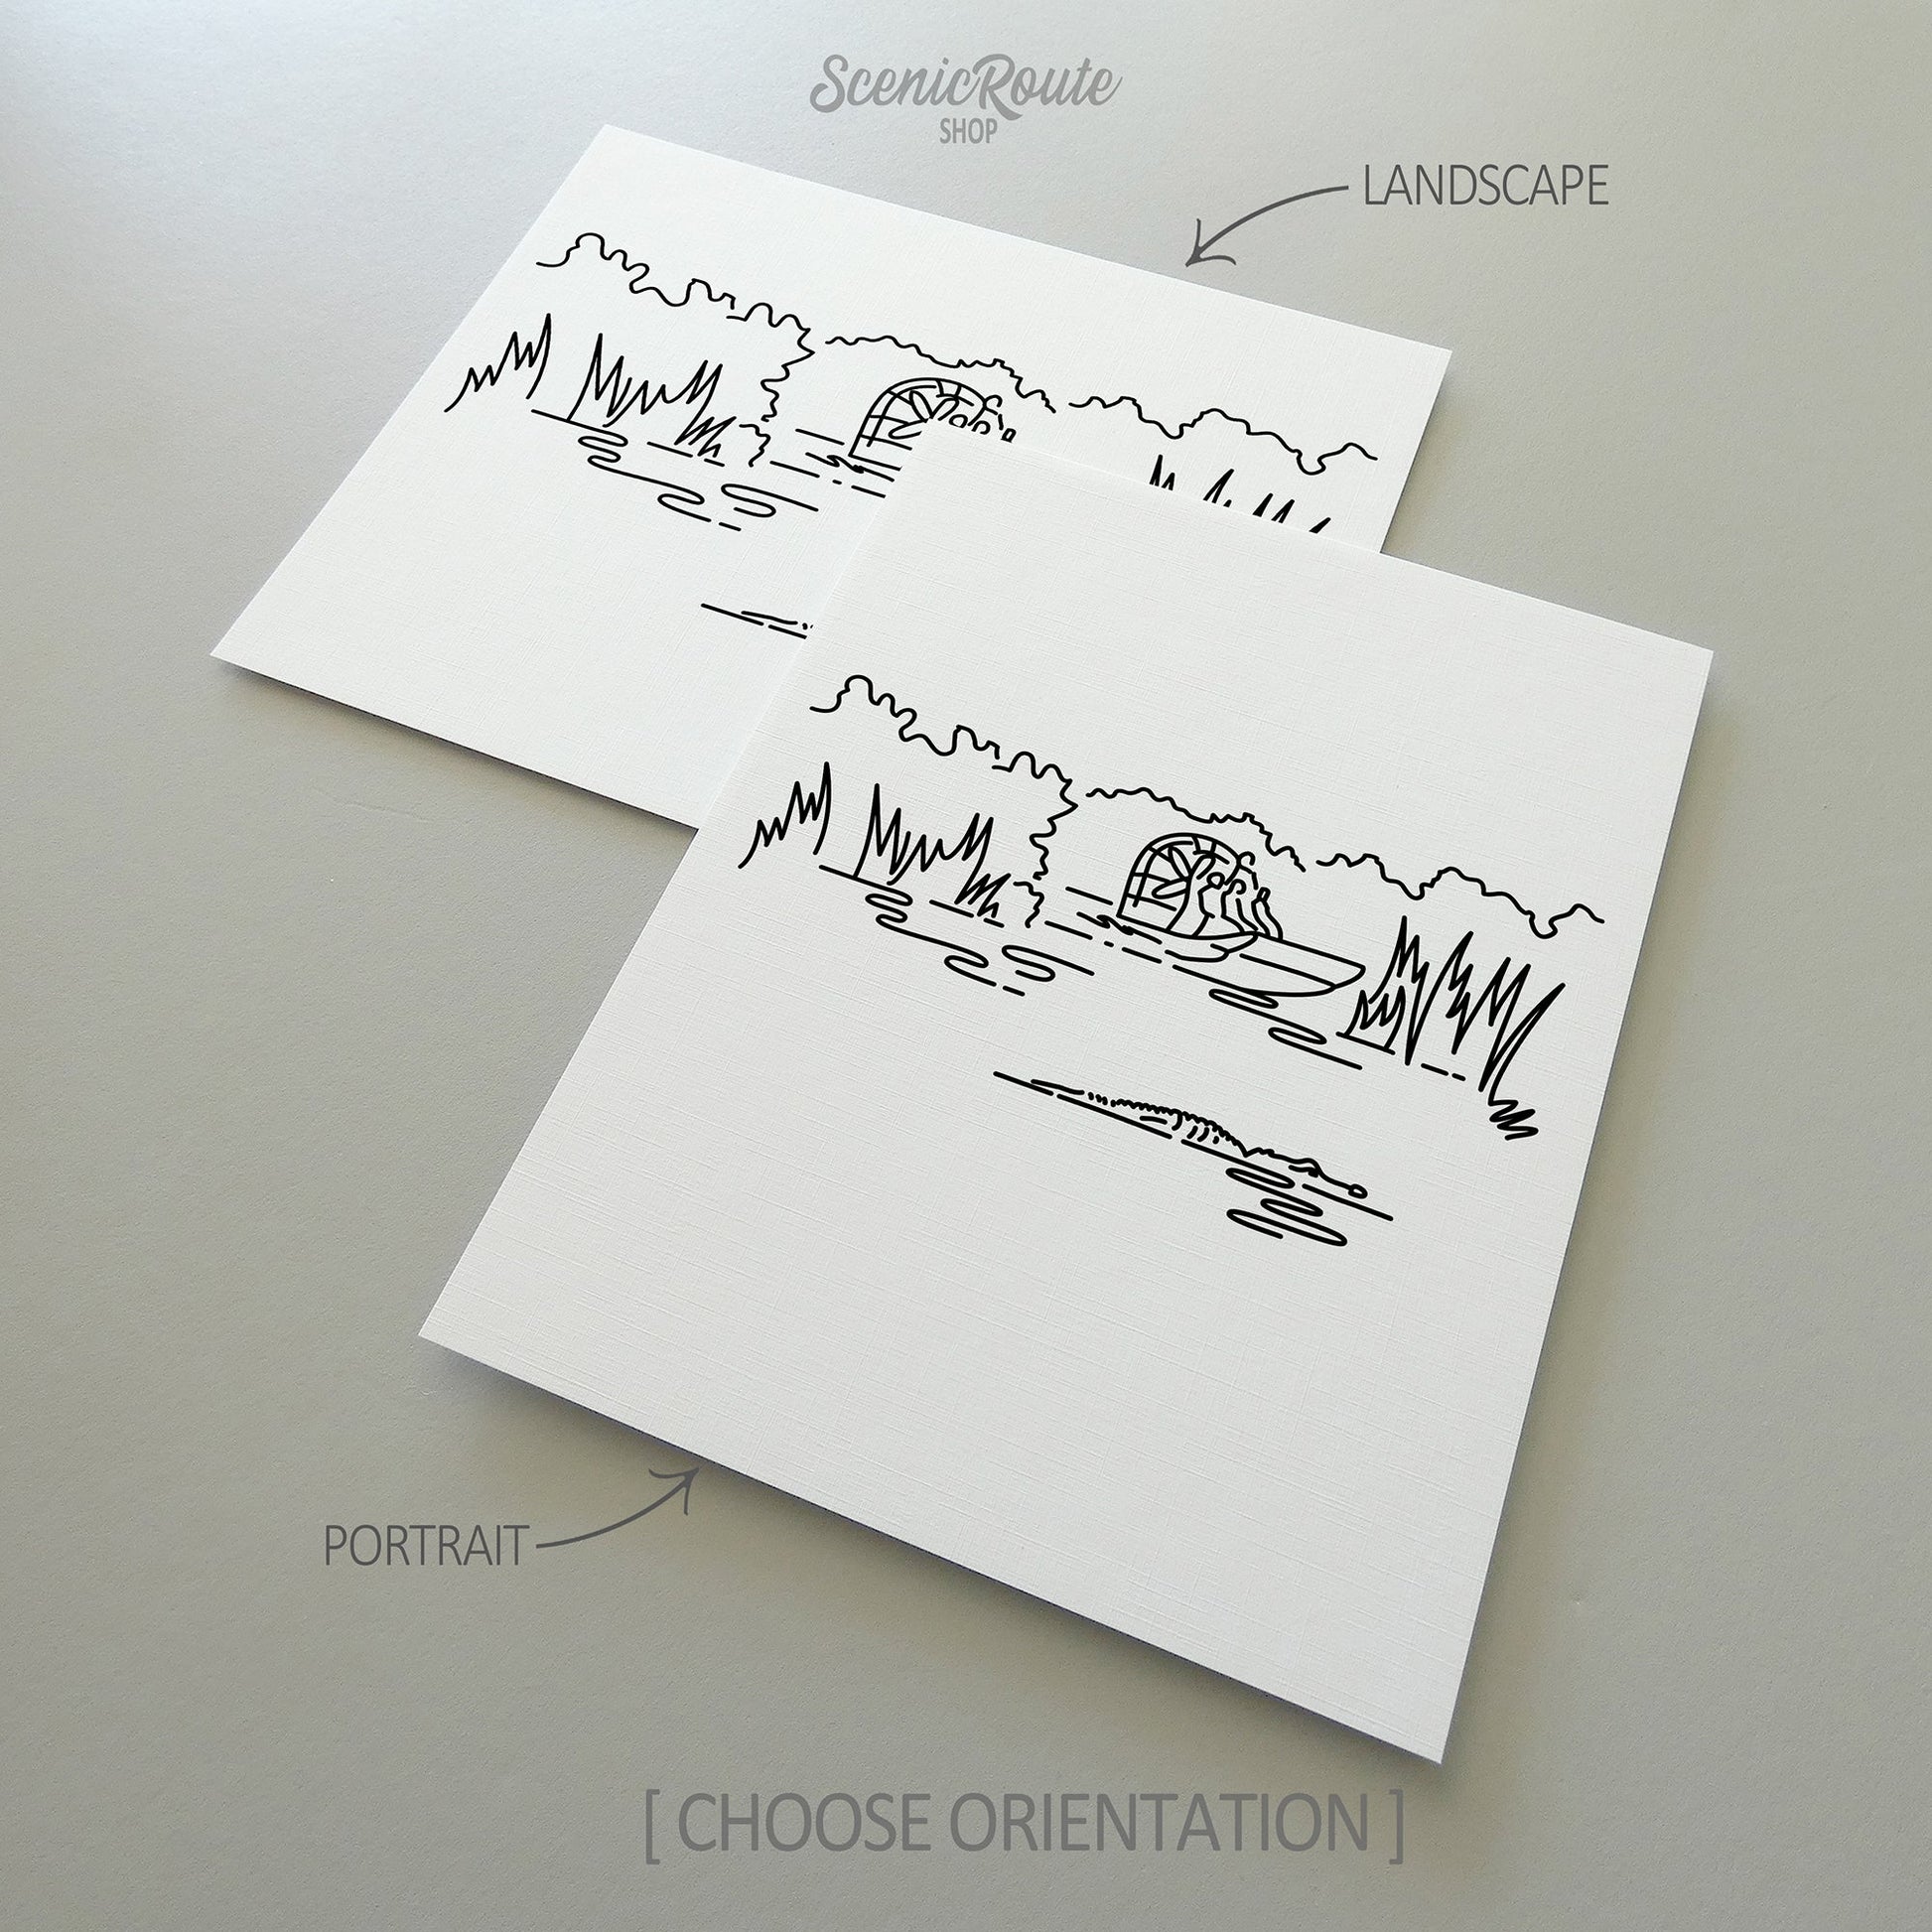 Two line art drawings of Everglades National Park on white linen paper with a gray background.  The pieces are shown in portrait and landscape orientation for the available art print options.